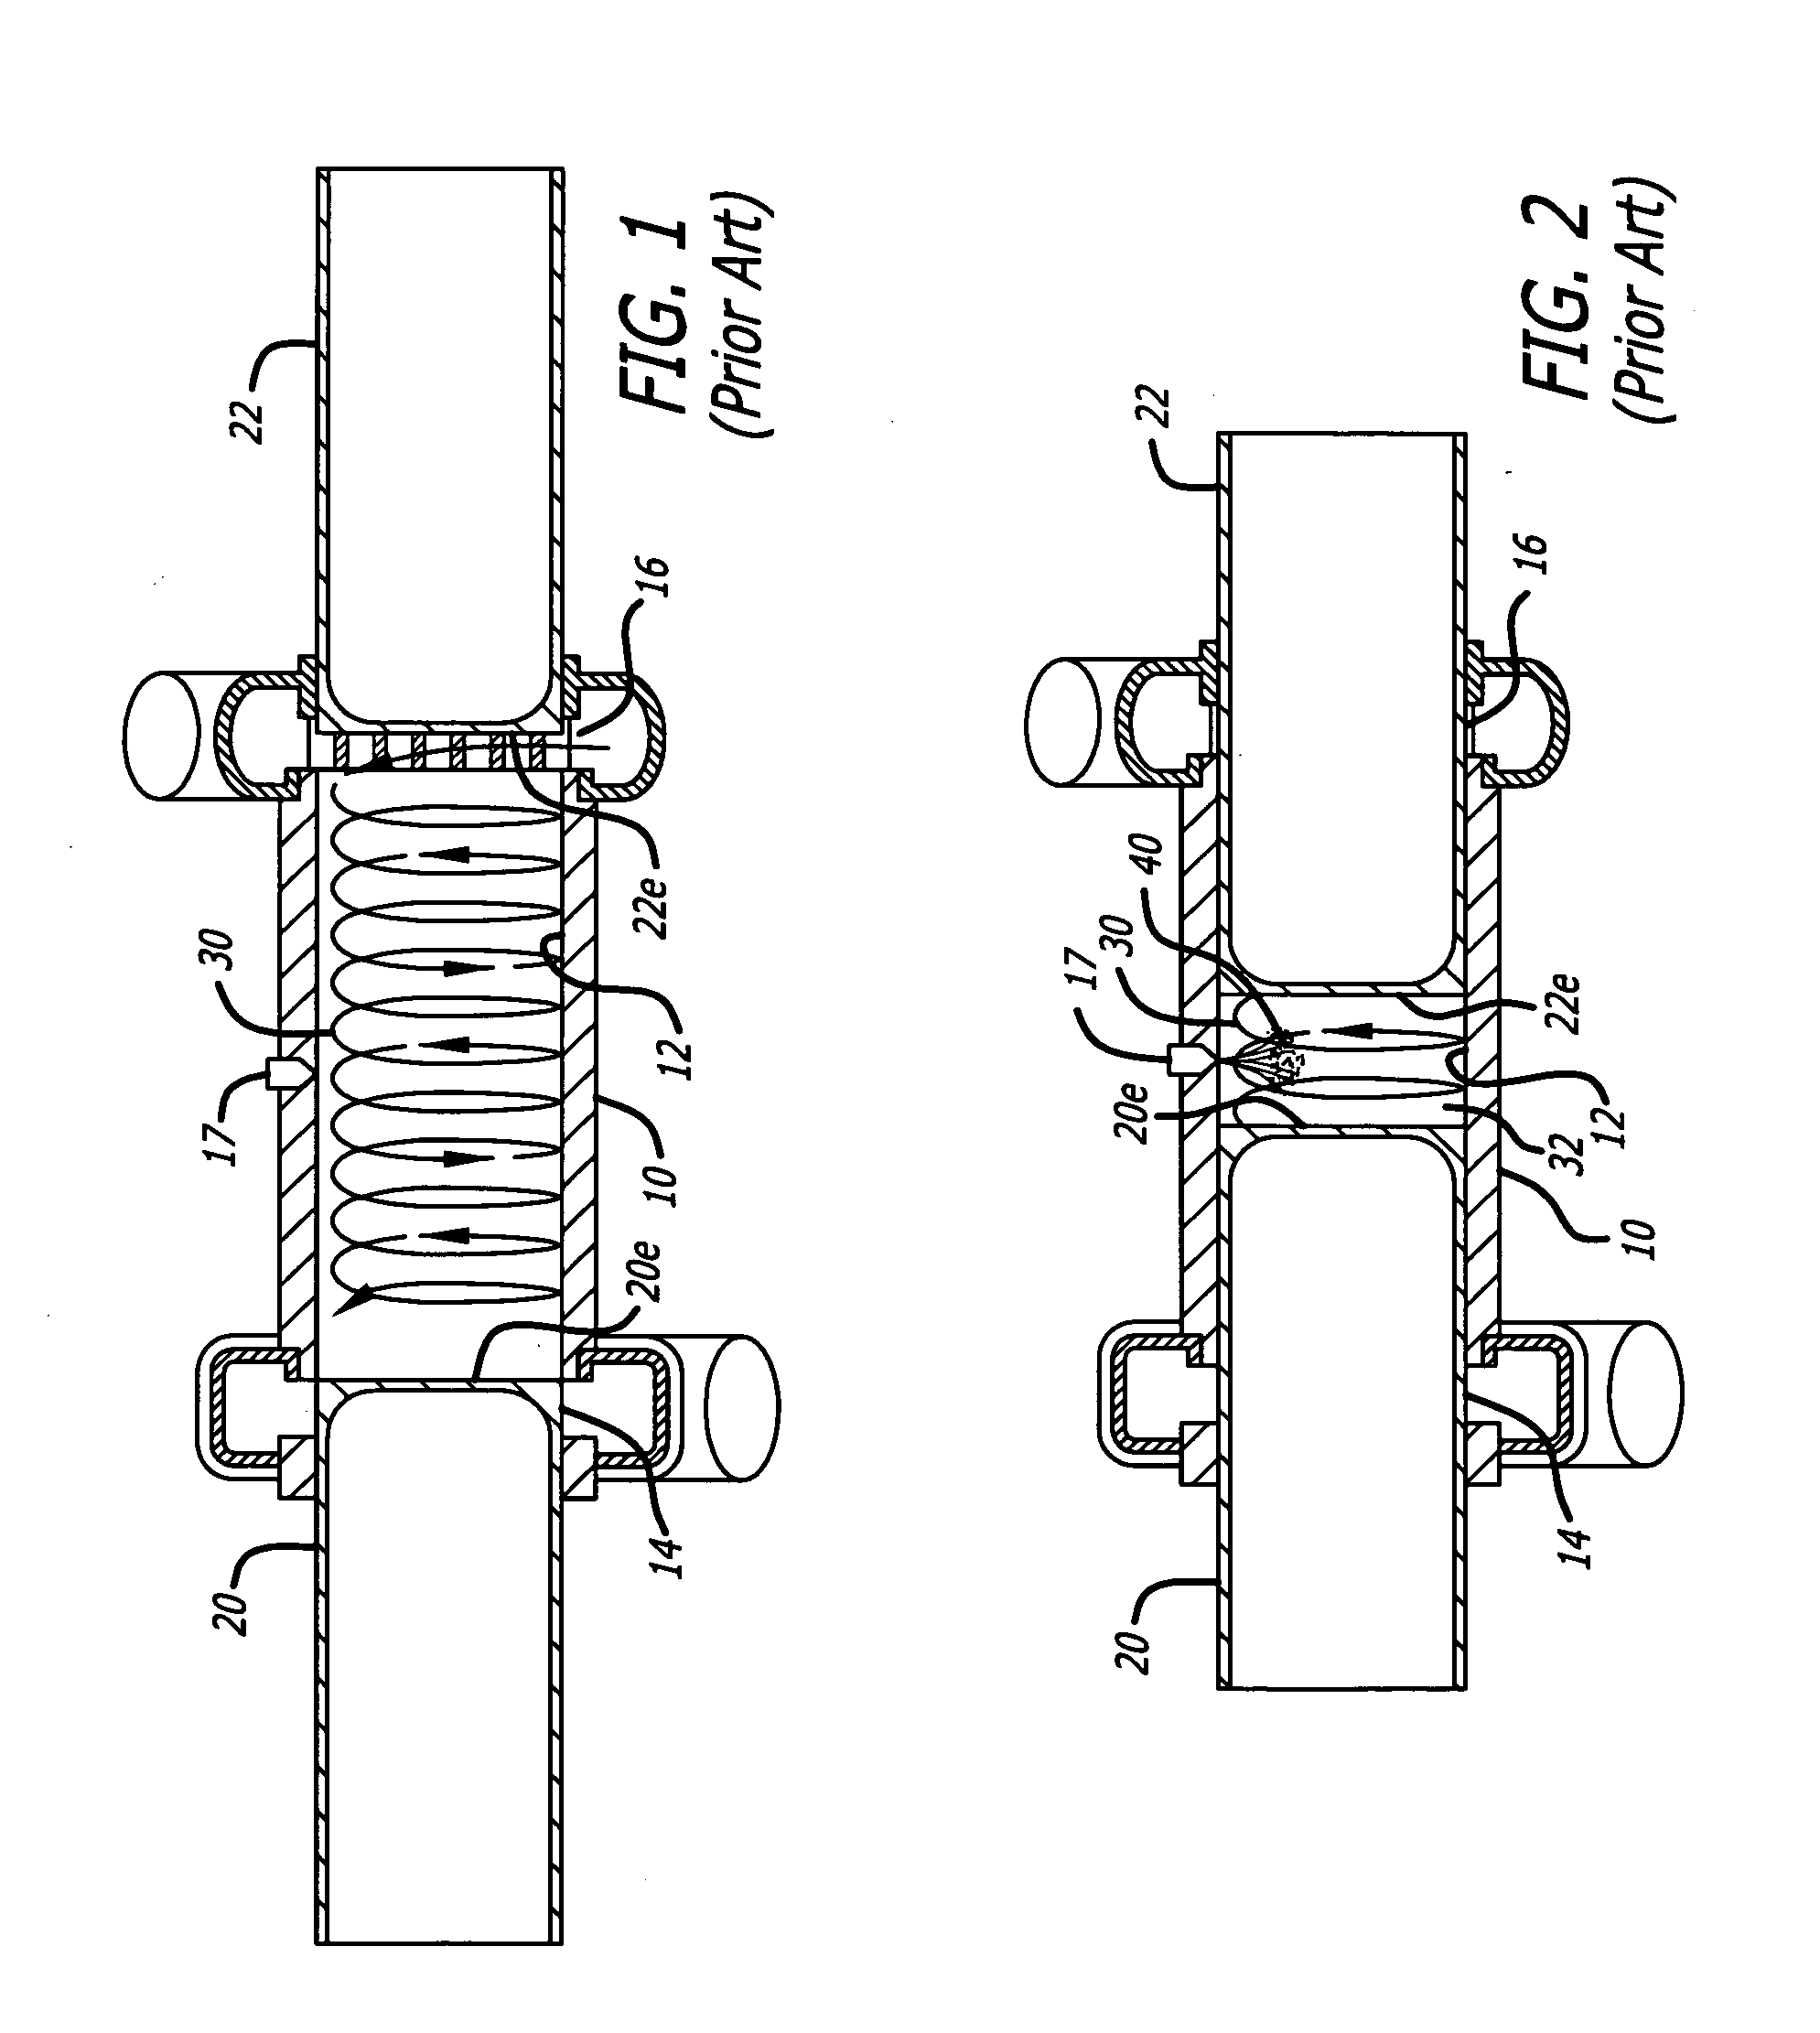 Two stroke, opposed-piston engines with engine braking